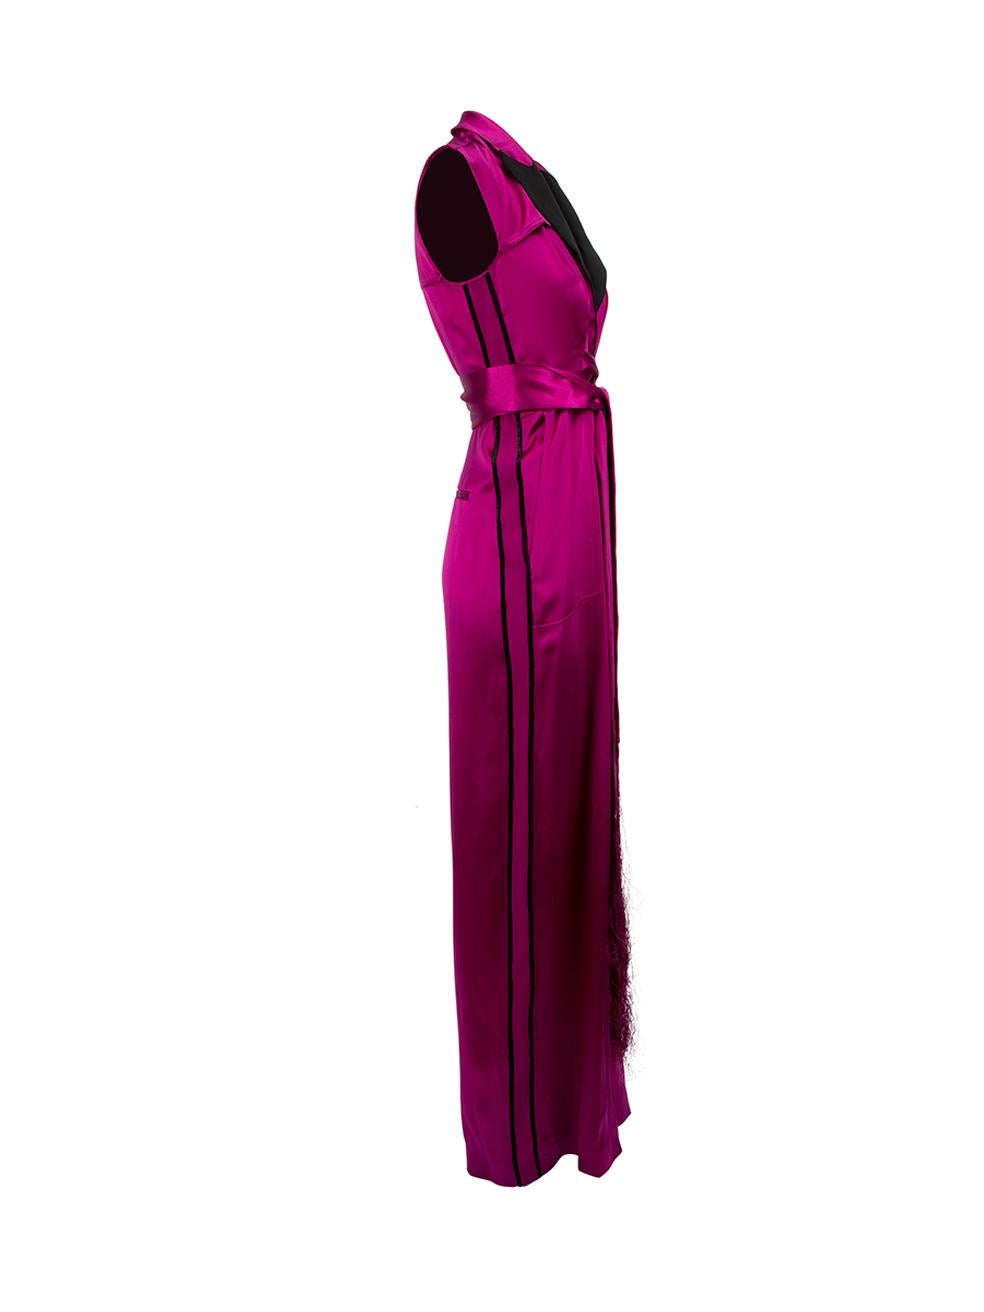 CONDITION is Very good. Minimal wear to jumpsuit is evident. The hemline is unstitched and there is a small stain near the bottom of the right pant leg on this used Amanda Wakeley designer resale item.



Details


Purple

Silk

Jumpsuit

Accent